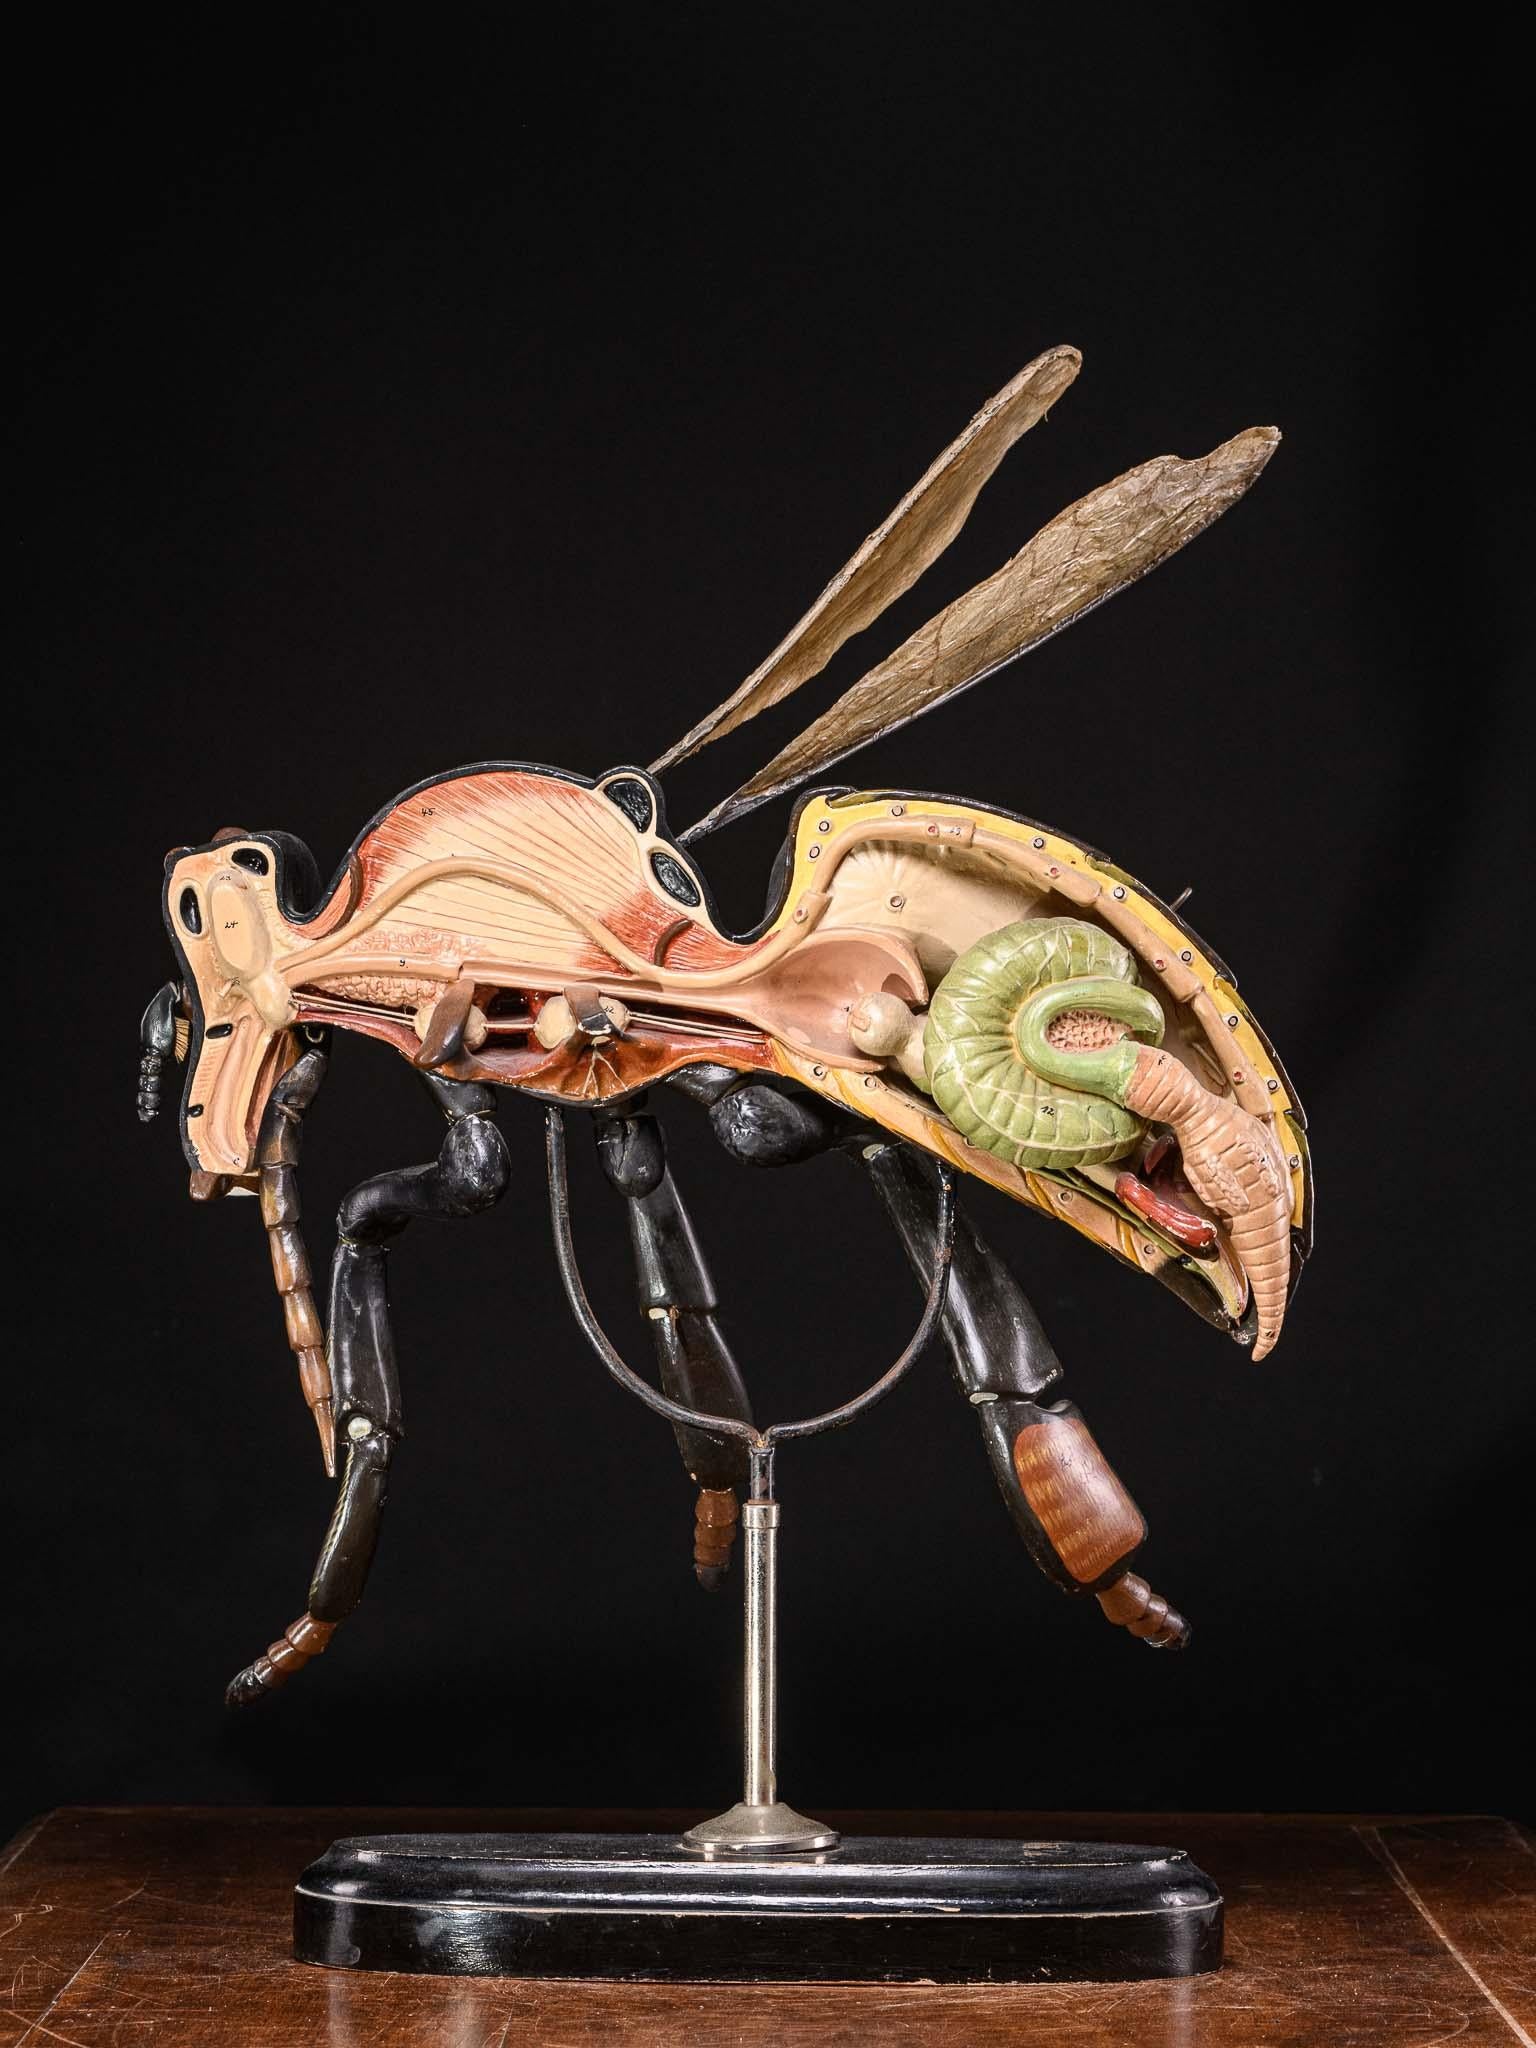 20th Century Large Didactical Model of a Bee labeled “ Denoyer-Geppert Company of Chicago 